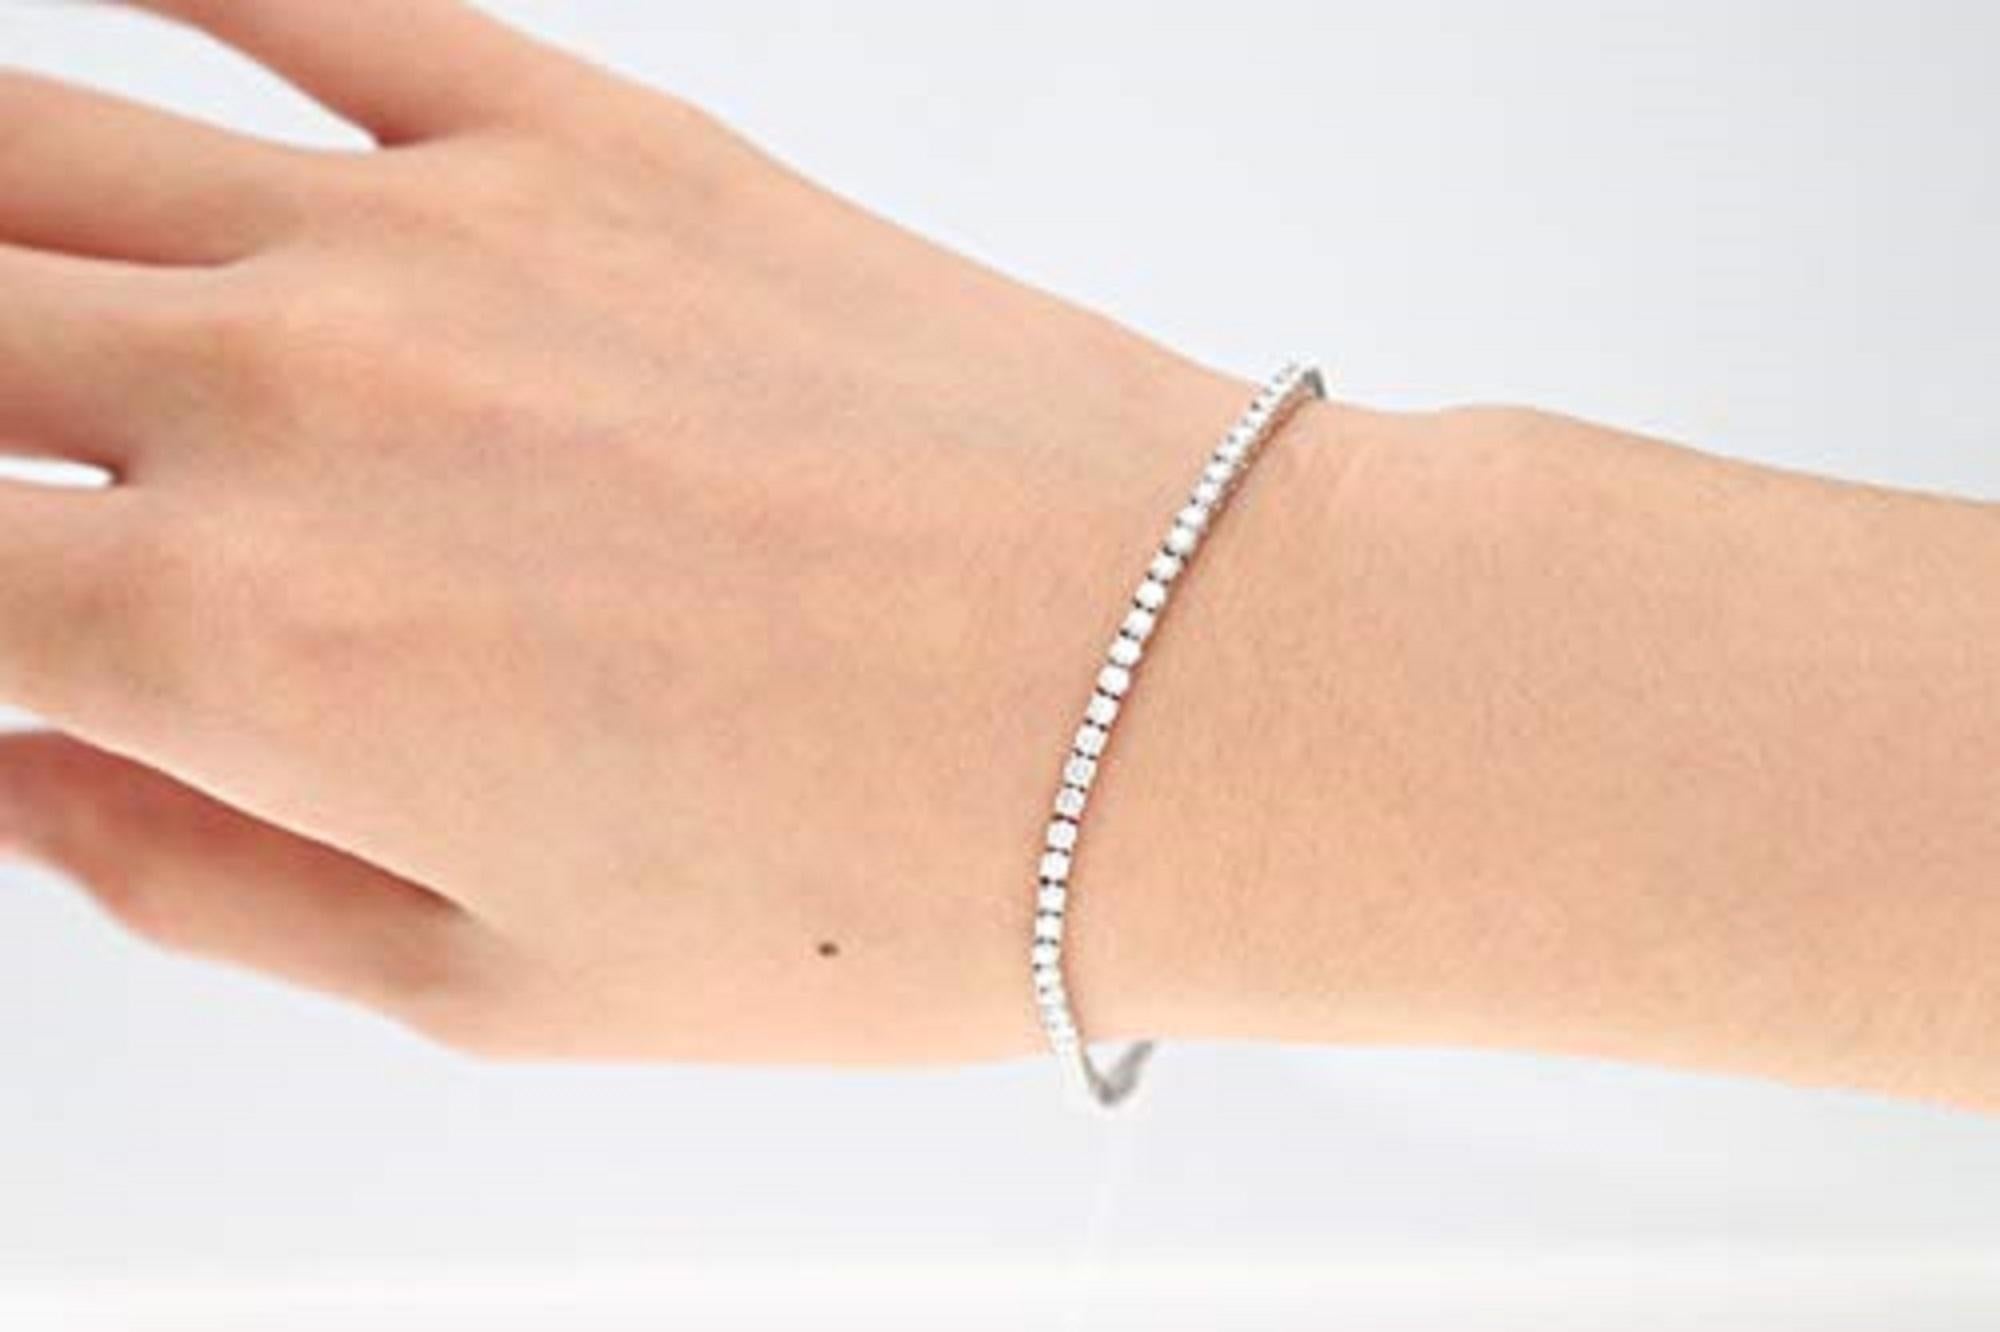 Stunning, timeless and classy eternity Unique Bracelet. Decorate yourself in luxury with this Gin & Grace Bracelet. The 14K White Gold jewelry boasts Round-Cut Prong Setting Natural White Diamond (78 pcs) 3.06 Carat accent stones for a lovely